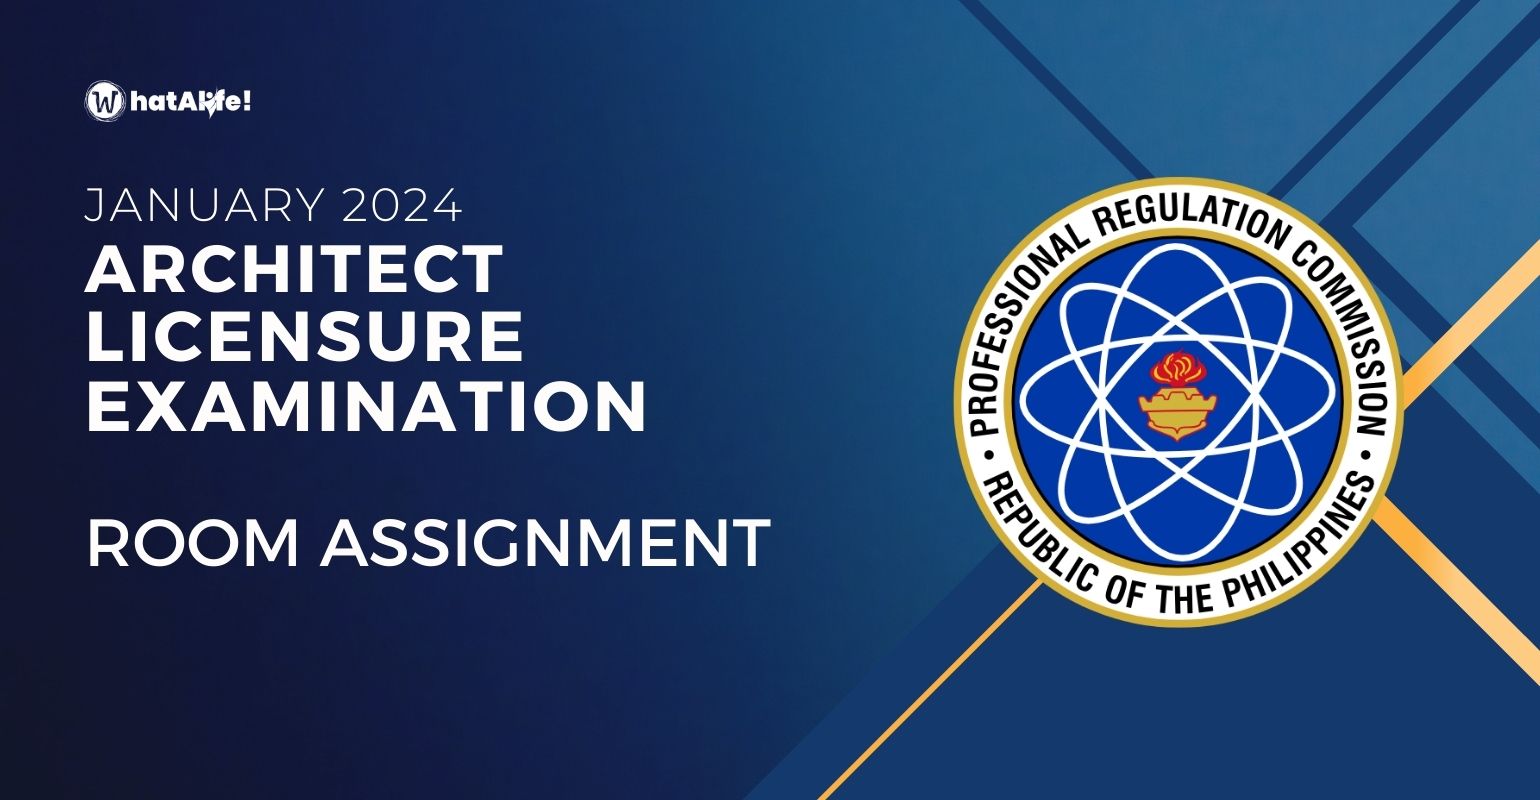 Room Assignment — January 2024 Architect Licensure Exam